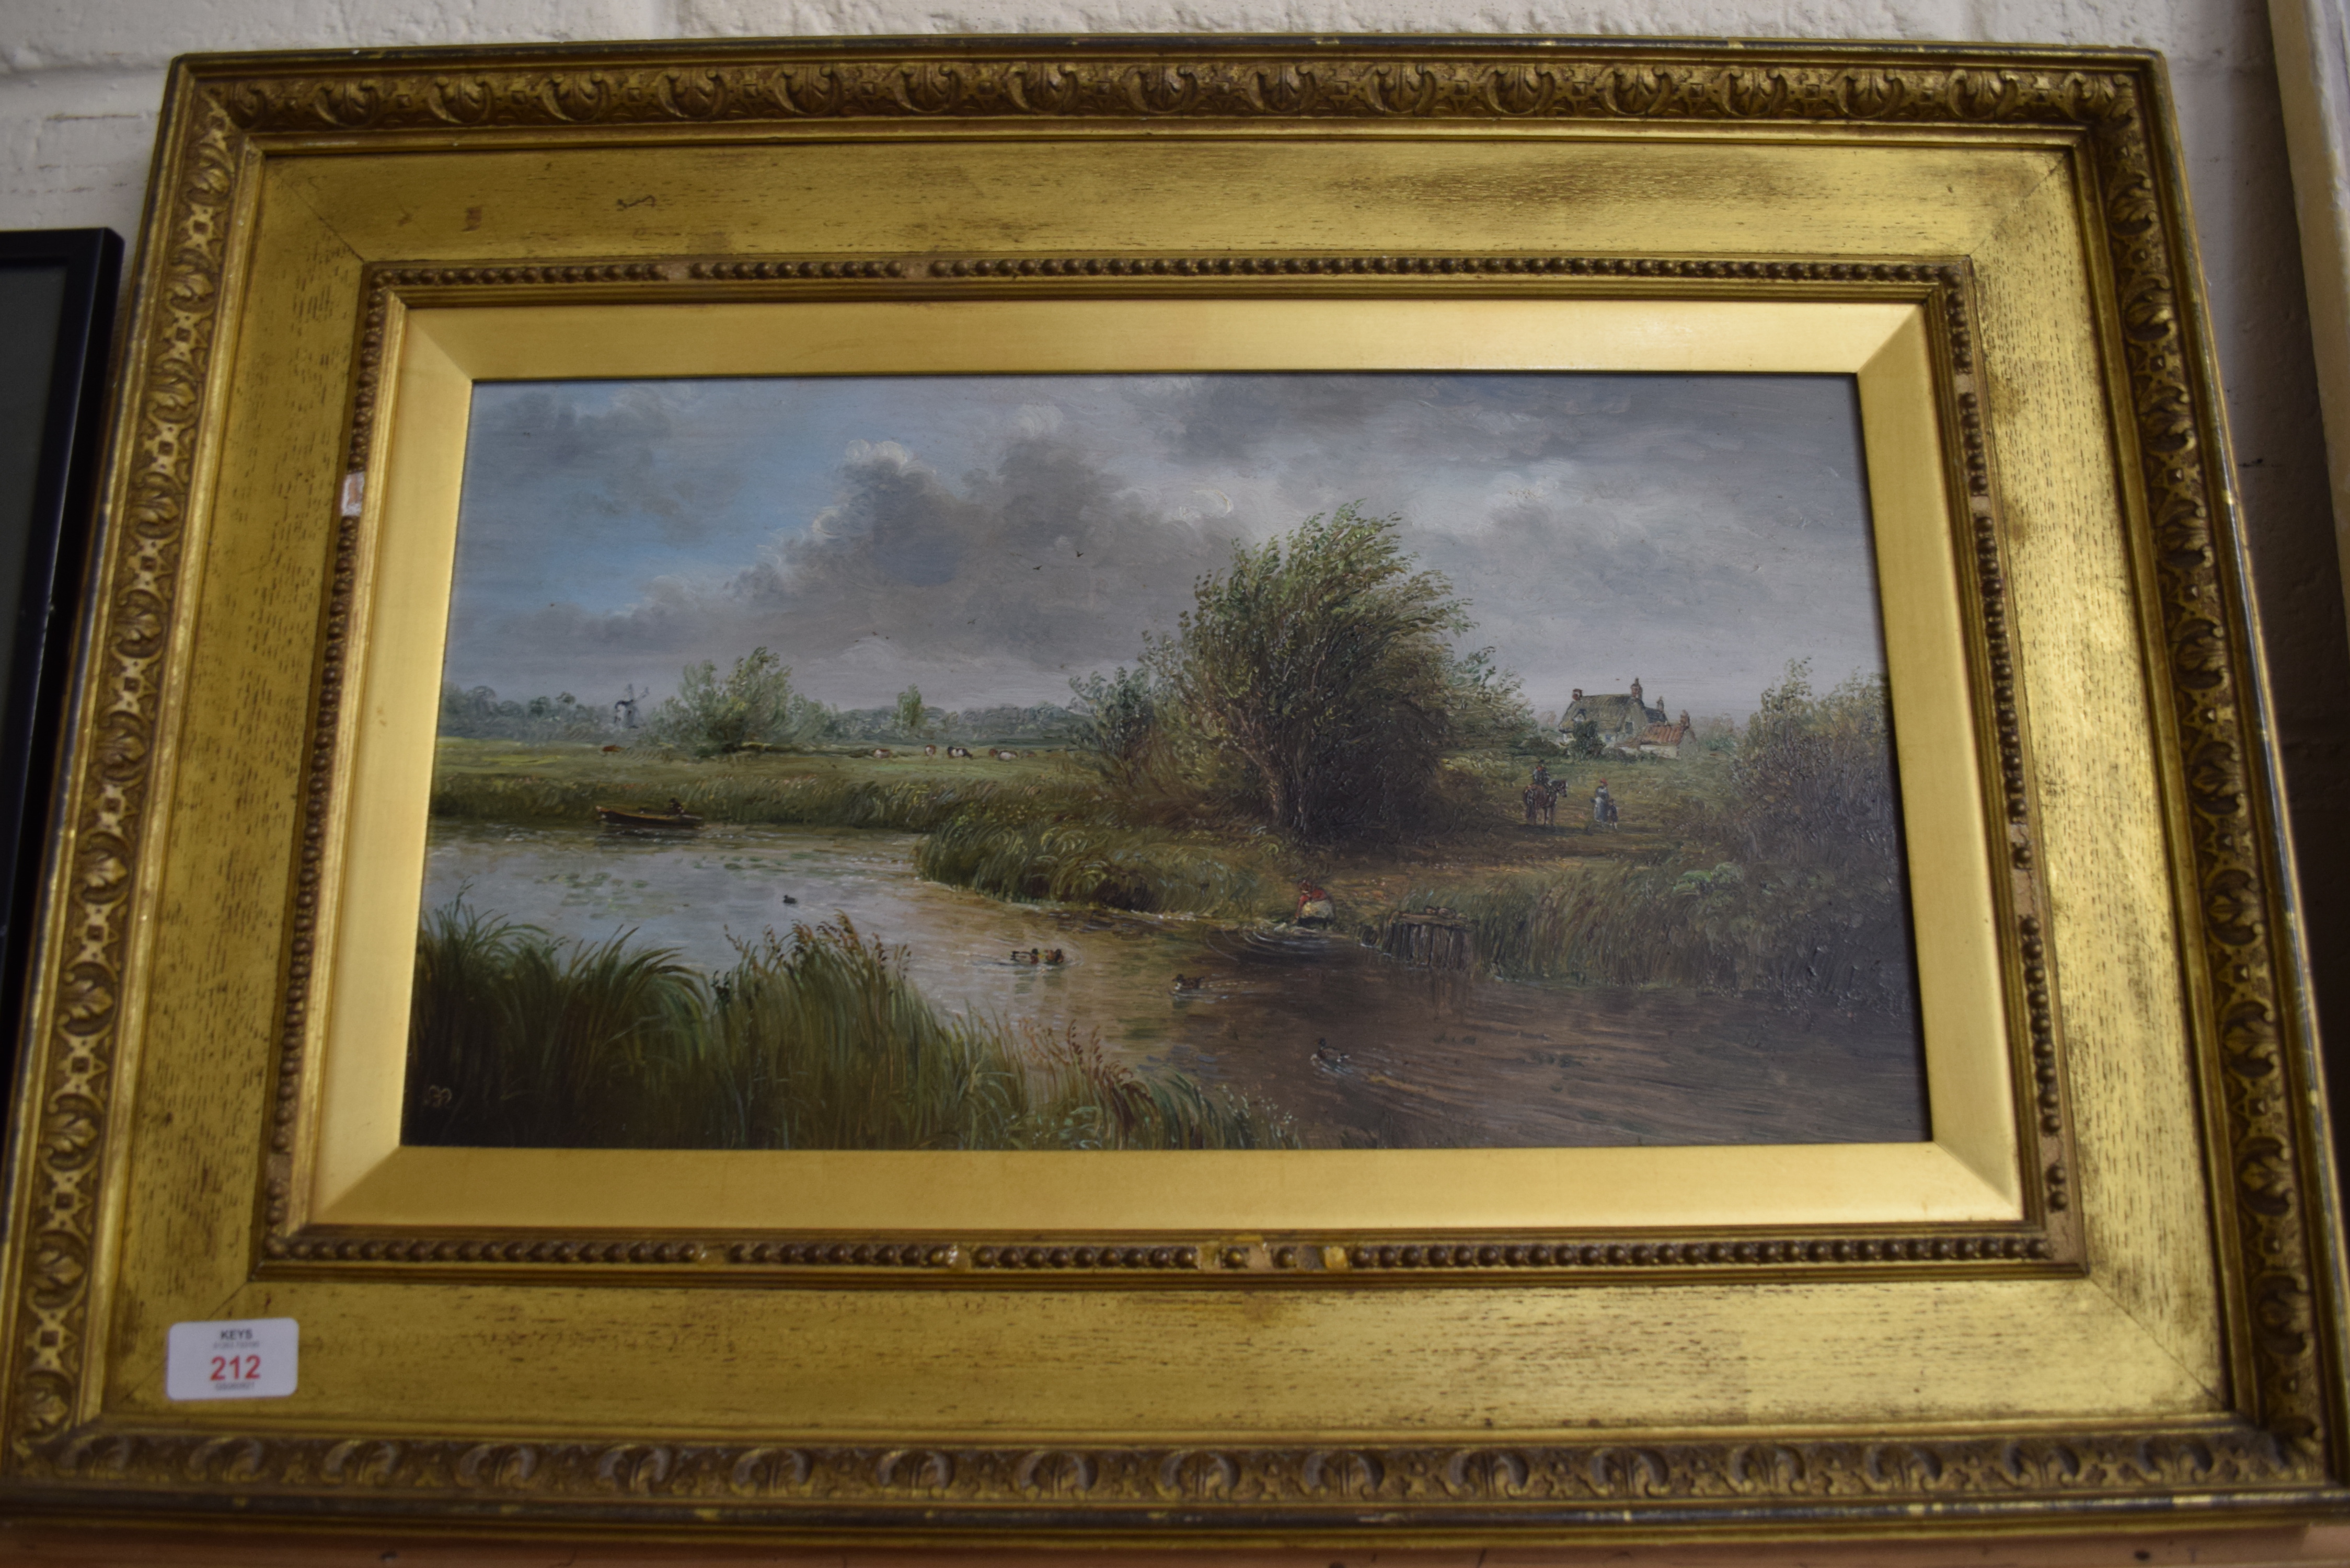 JOHN MACE, STUDY OF RURAL SCENE WITH POND AND DISTANT WINDMILL, GILT FRAMED, 66CM WIDE